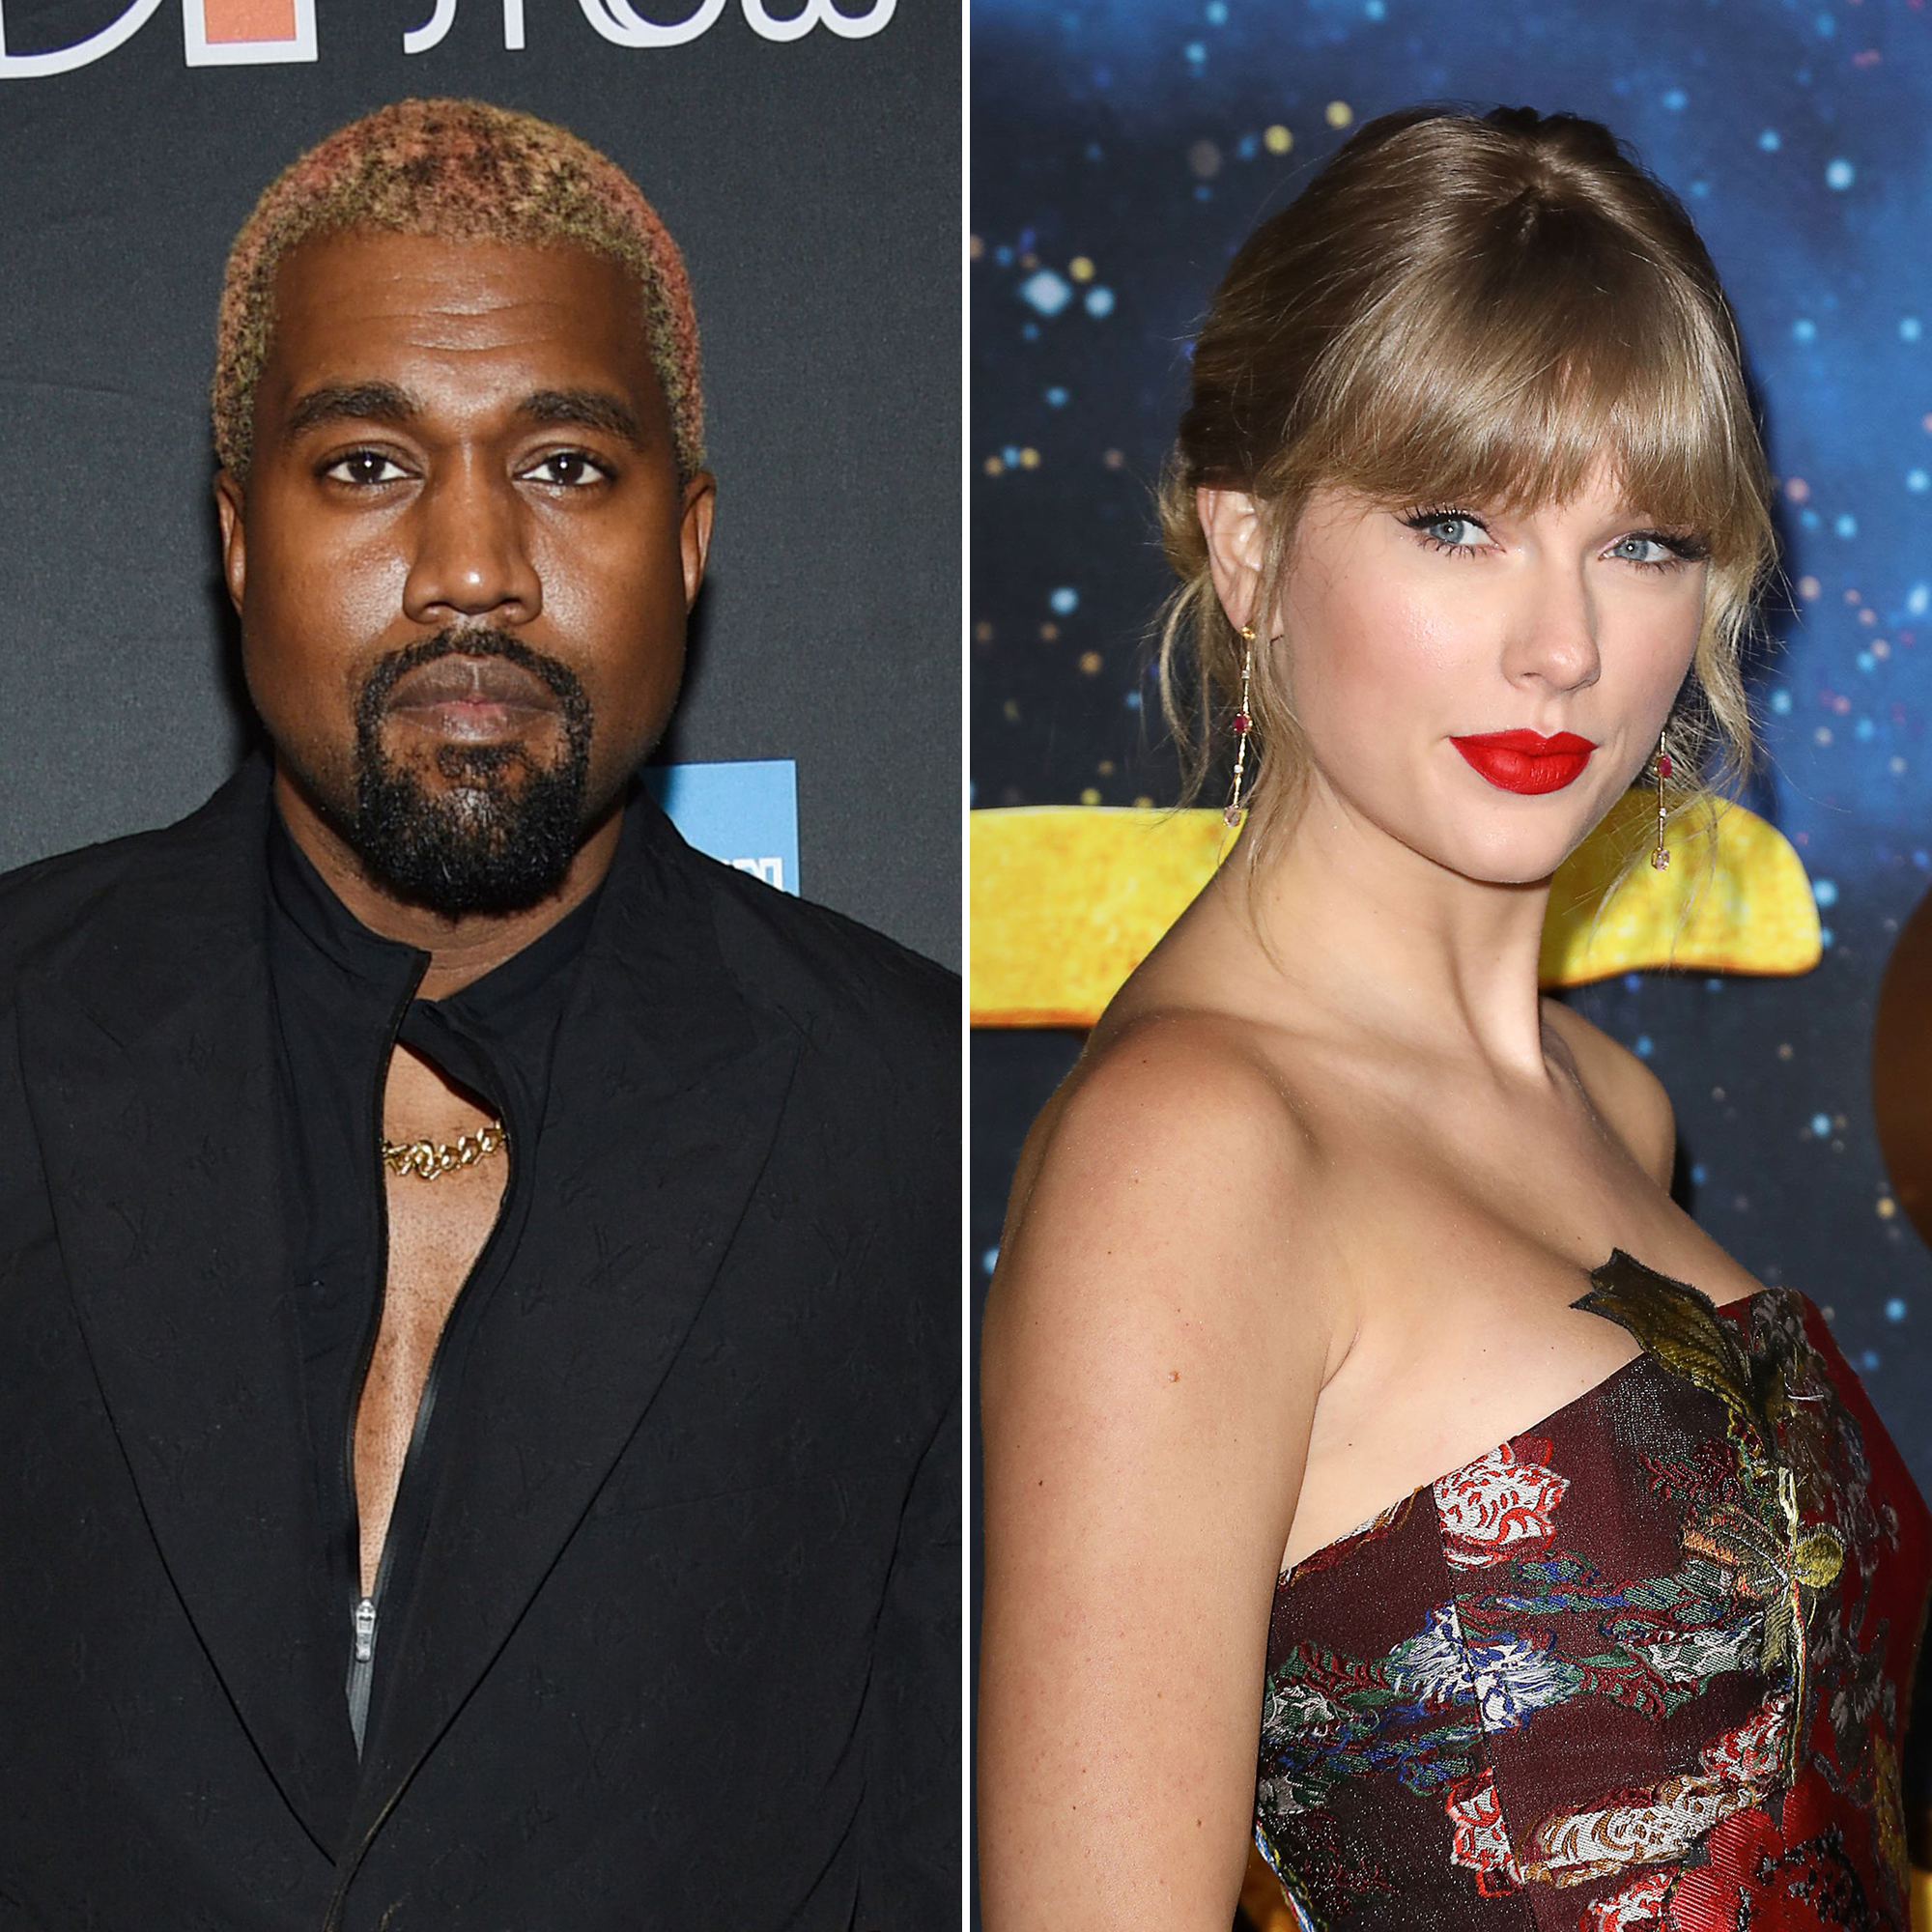 Kanye West Vows to Get Taylor Swift Her Music Back Amid Twitter Rant